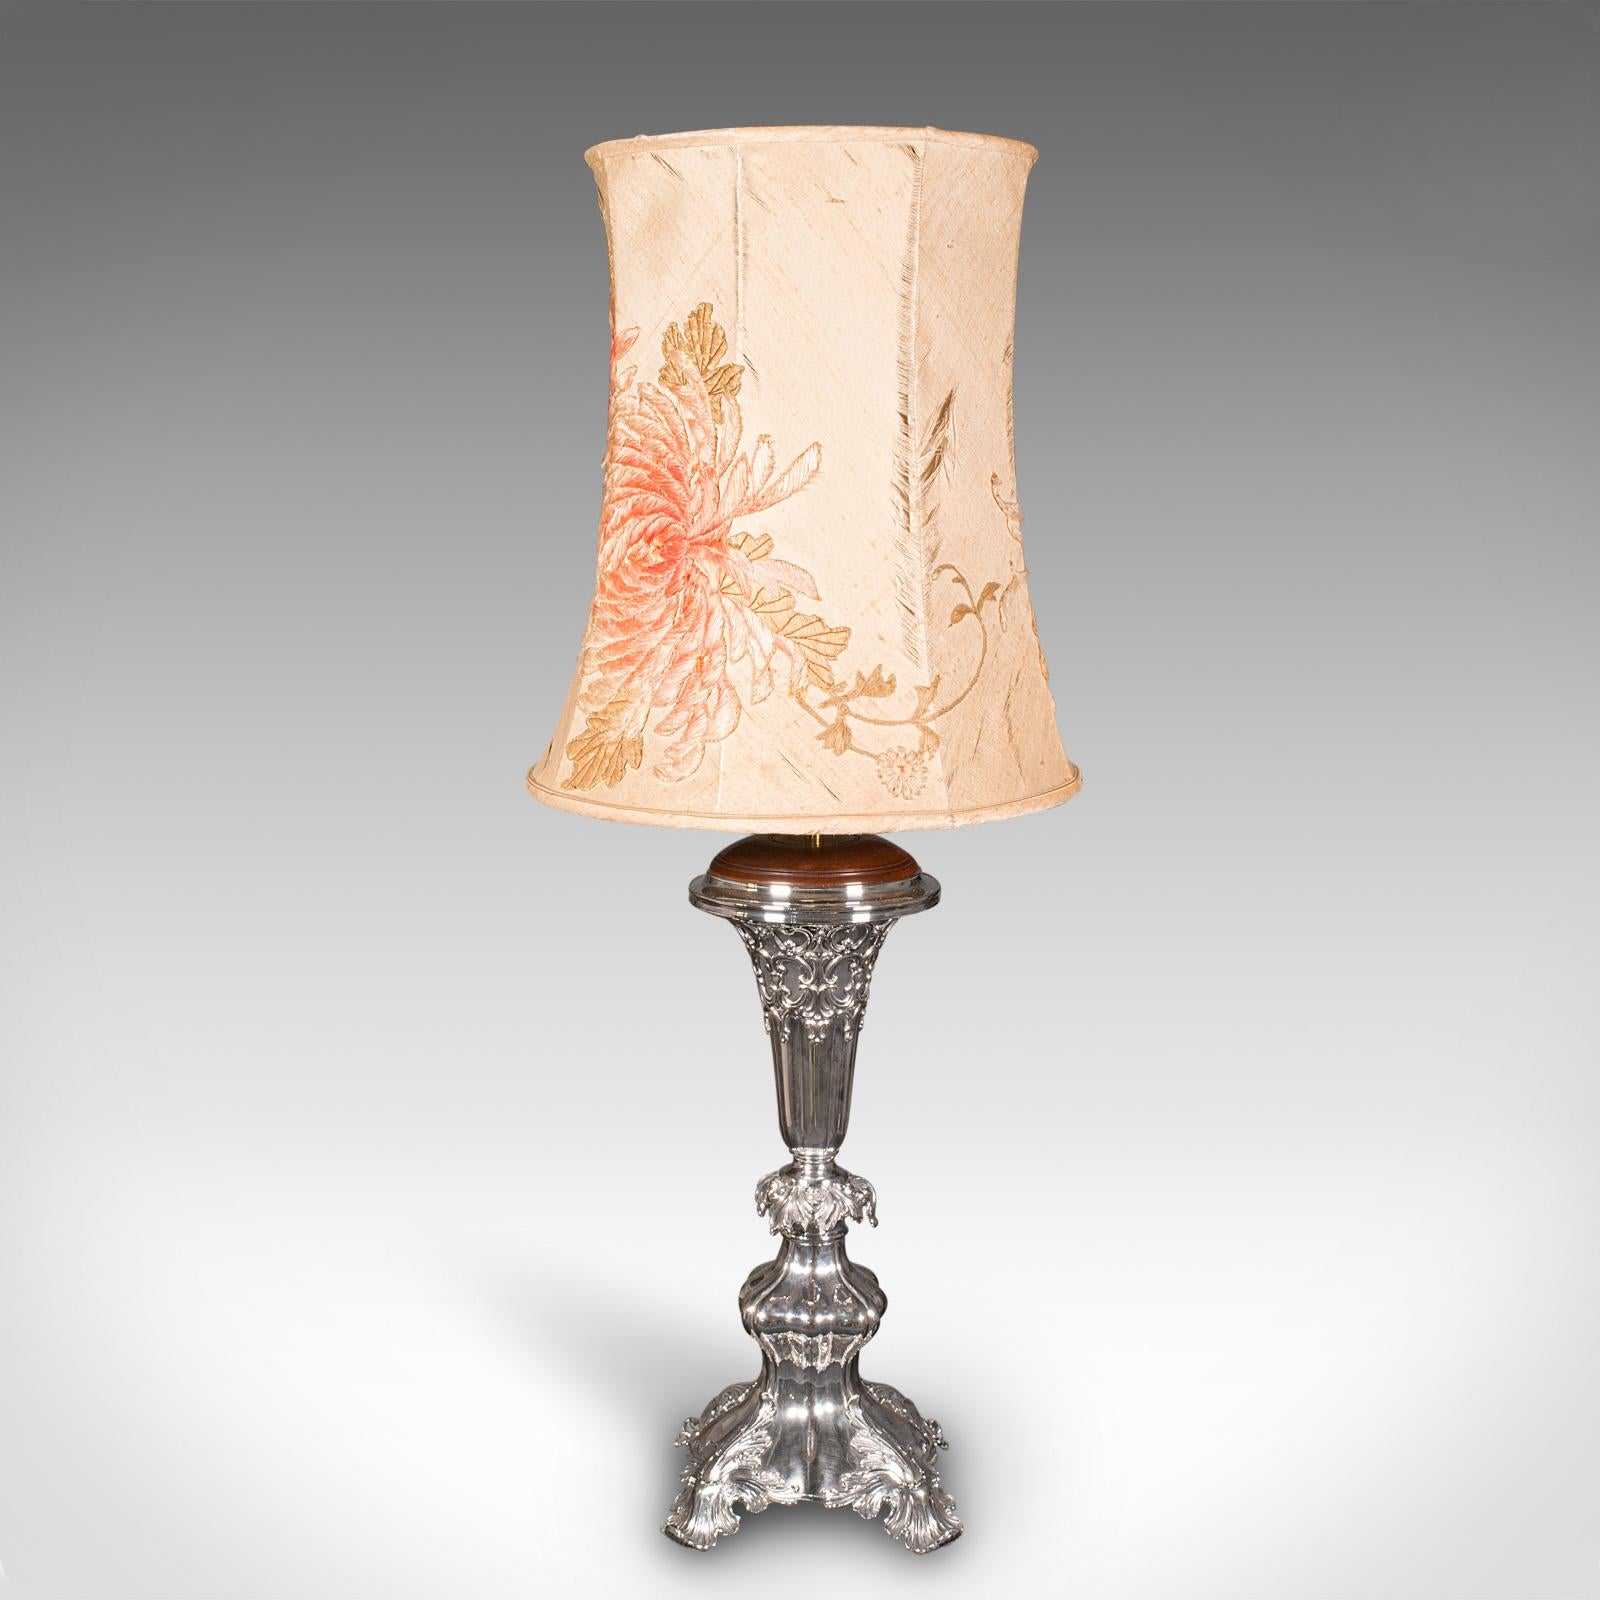 European Large Antique Table Lamp, English Silver Plate, Walnut, Light, Victorian, C.1900 For Sale